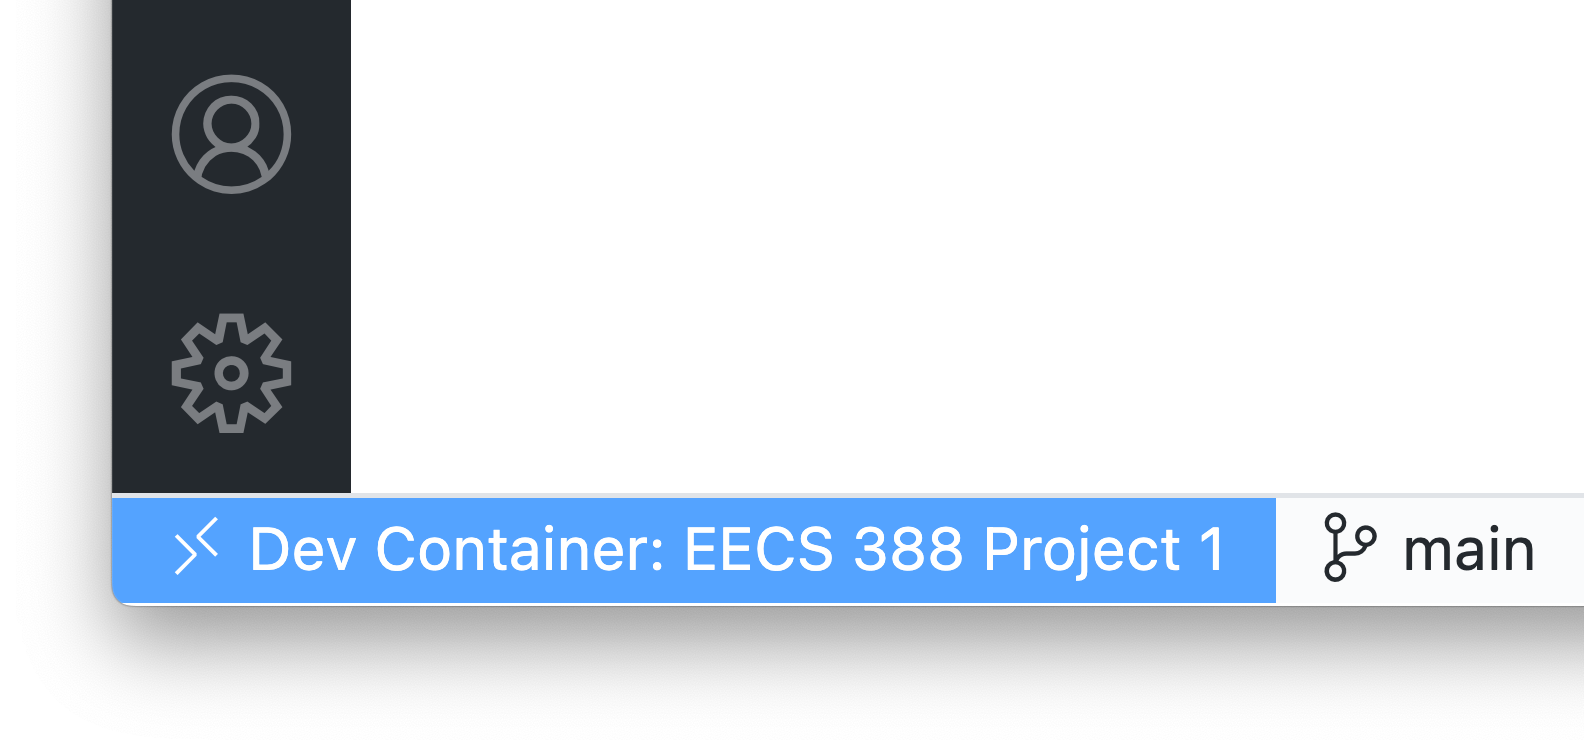 Dev Container